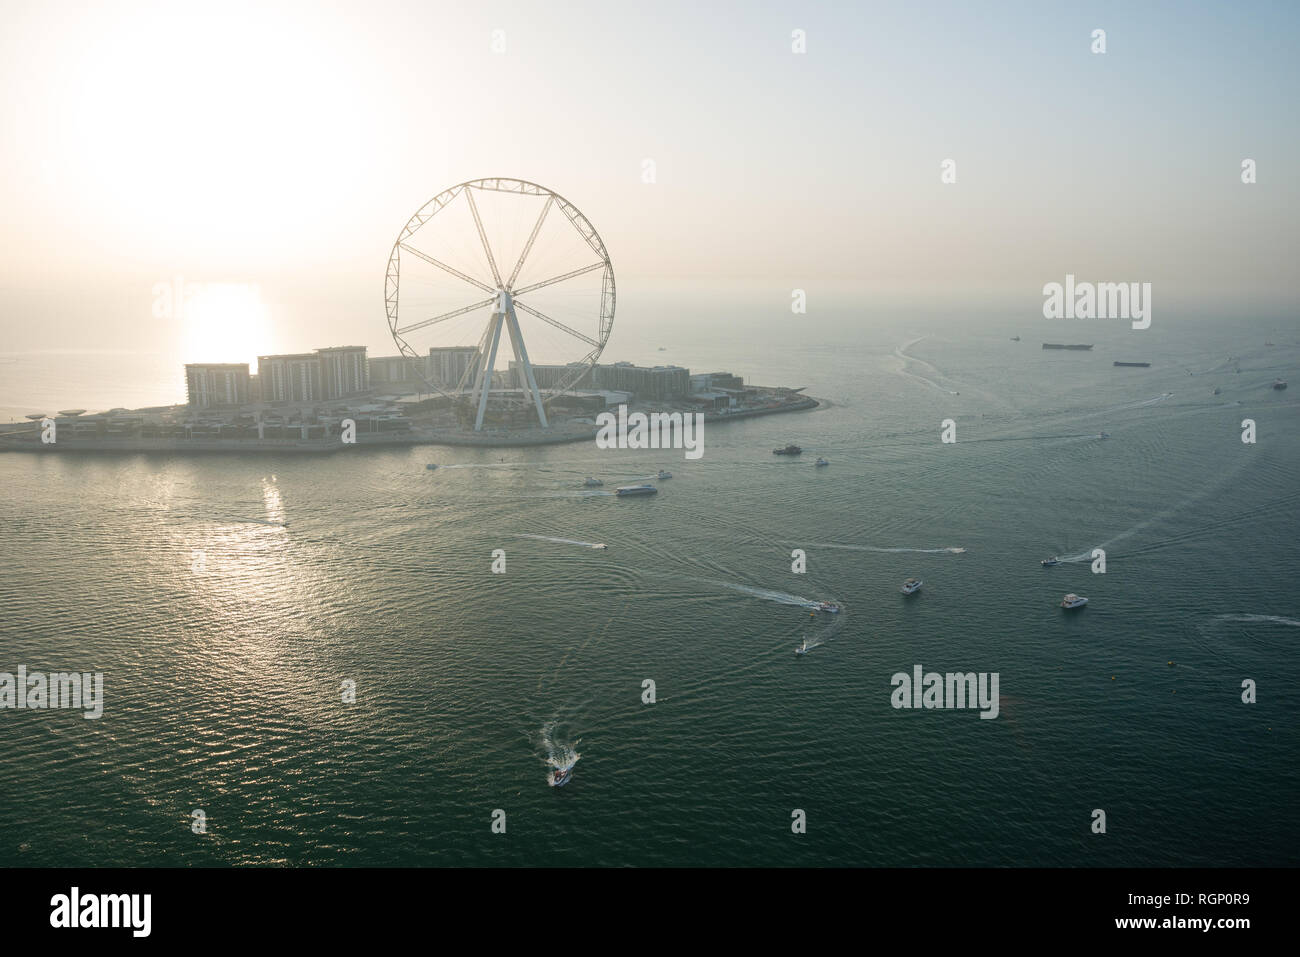 DUBAI, UAE - February 16, 2018: Aerial view of the Dubai Eye and the huge Ferris Wheel that should soon become main attraction on Bluewaters Island in Stock Photo